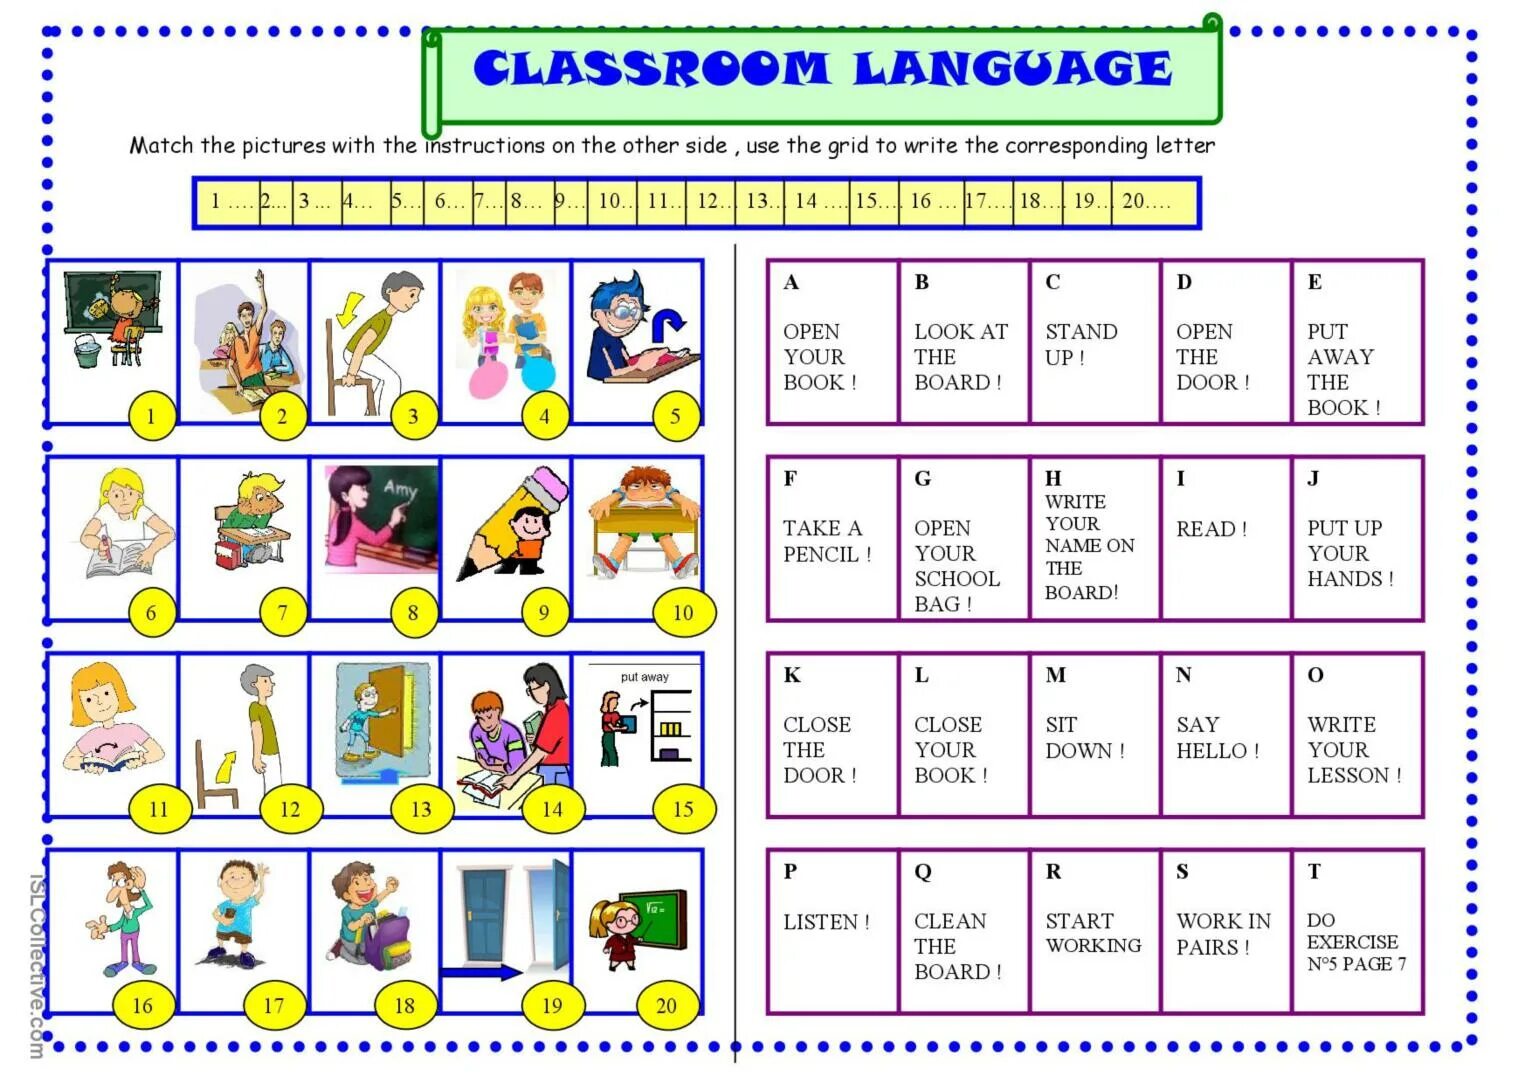 Английский Classroom language. Упражнения на Classroom language. Classroom language на уроке английского. Commands in English for Kids. To be speaking exercises